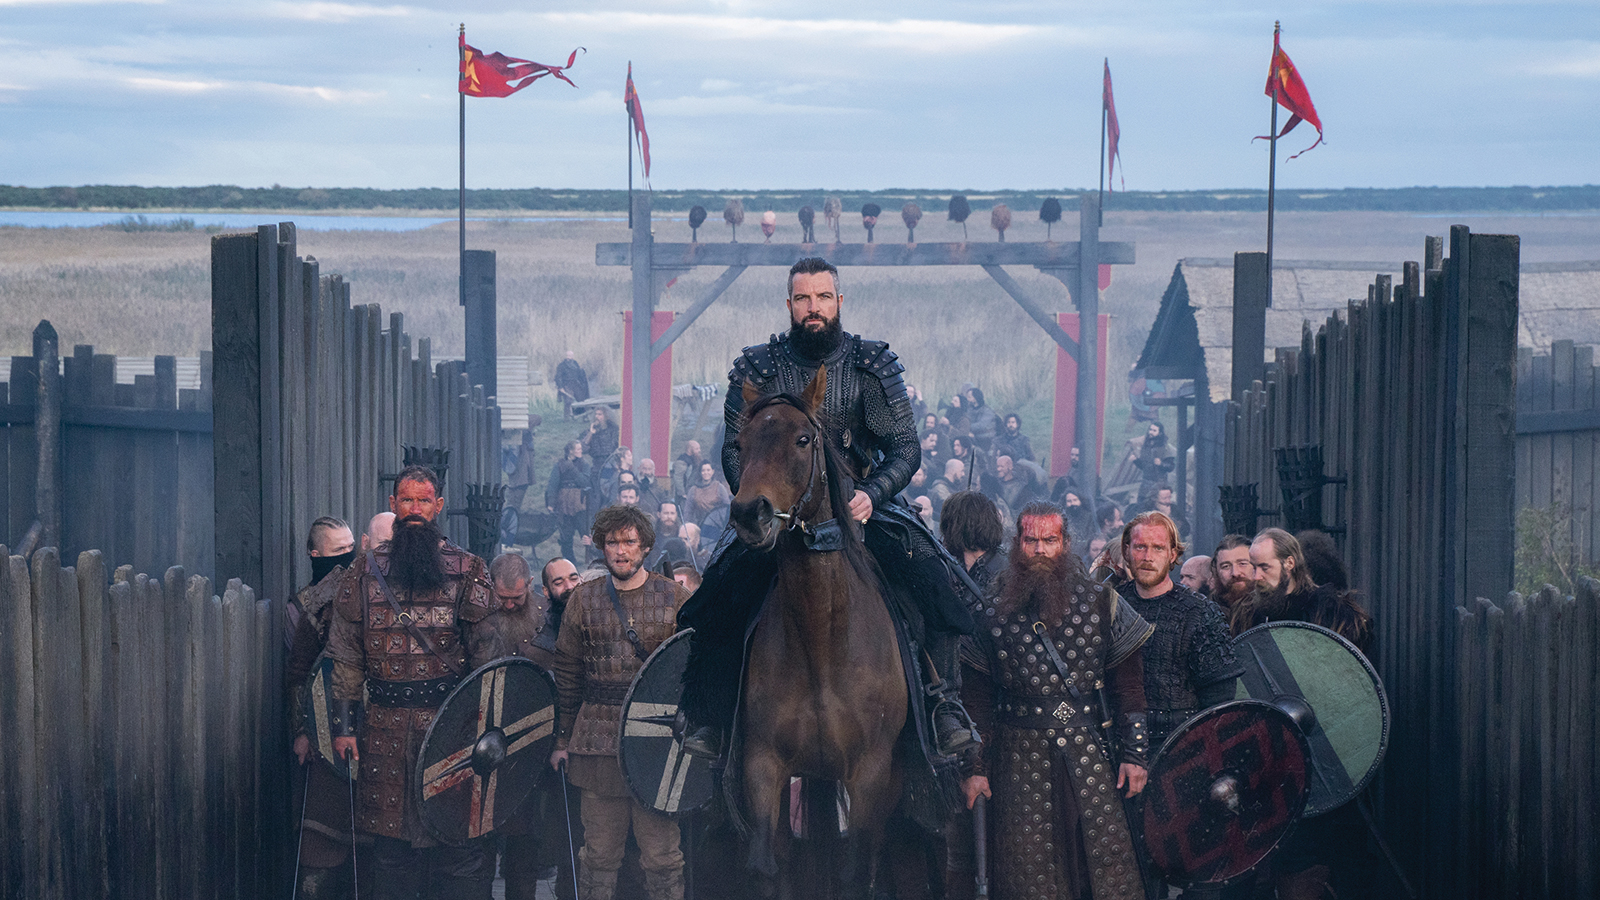 Vikings season 6: Who is Cnut the Great? Will Canute become King